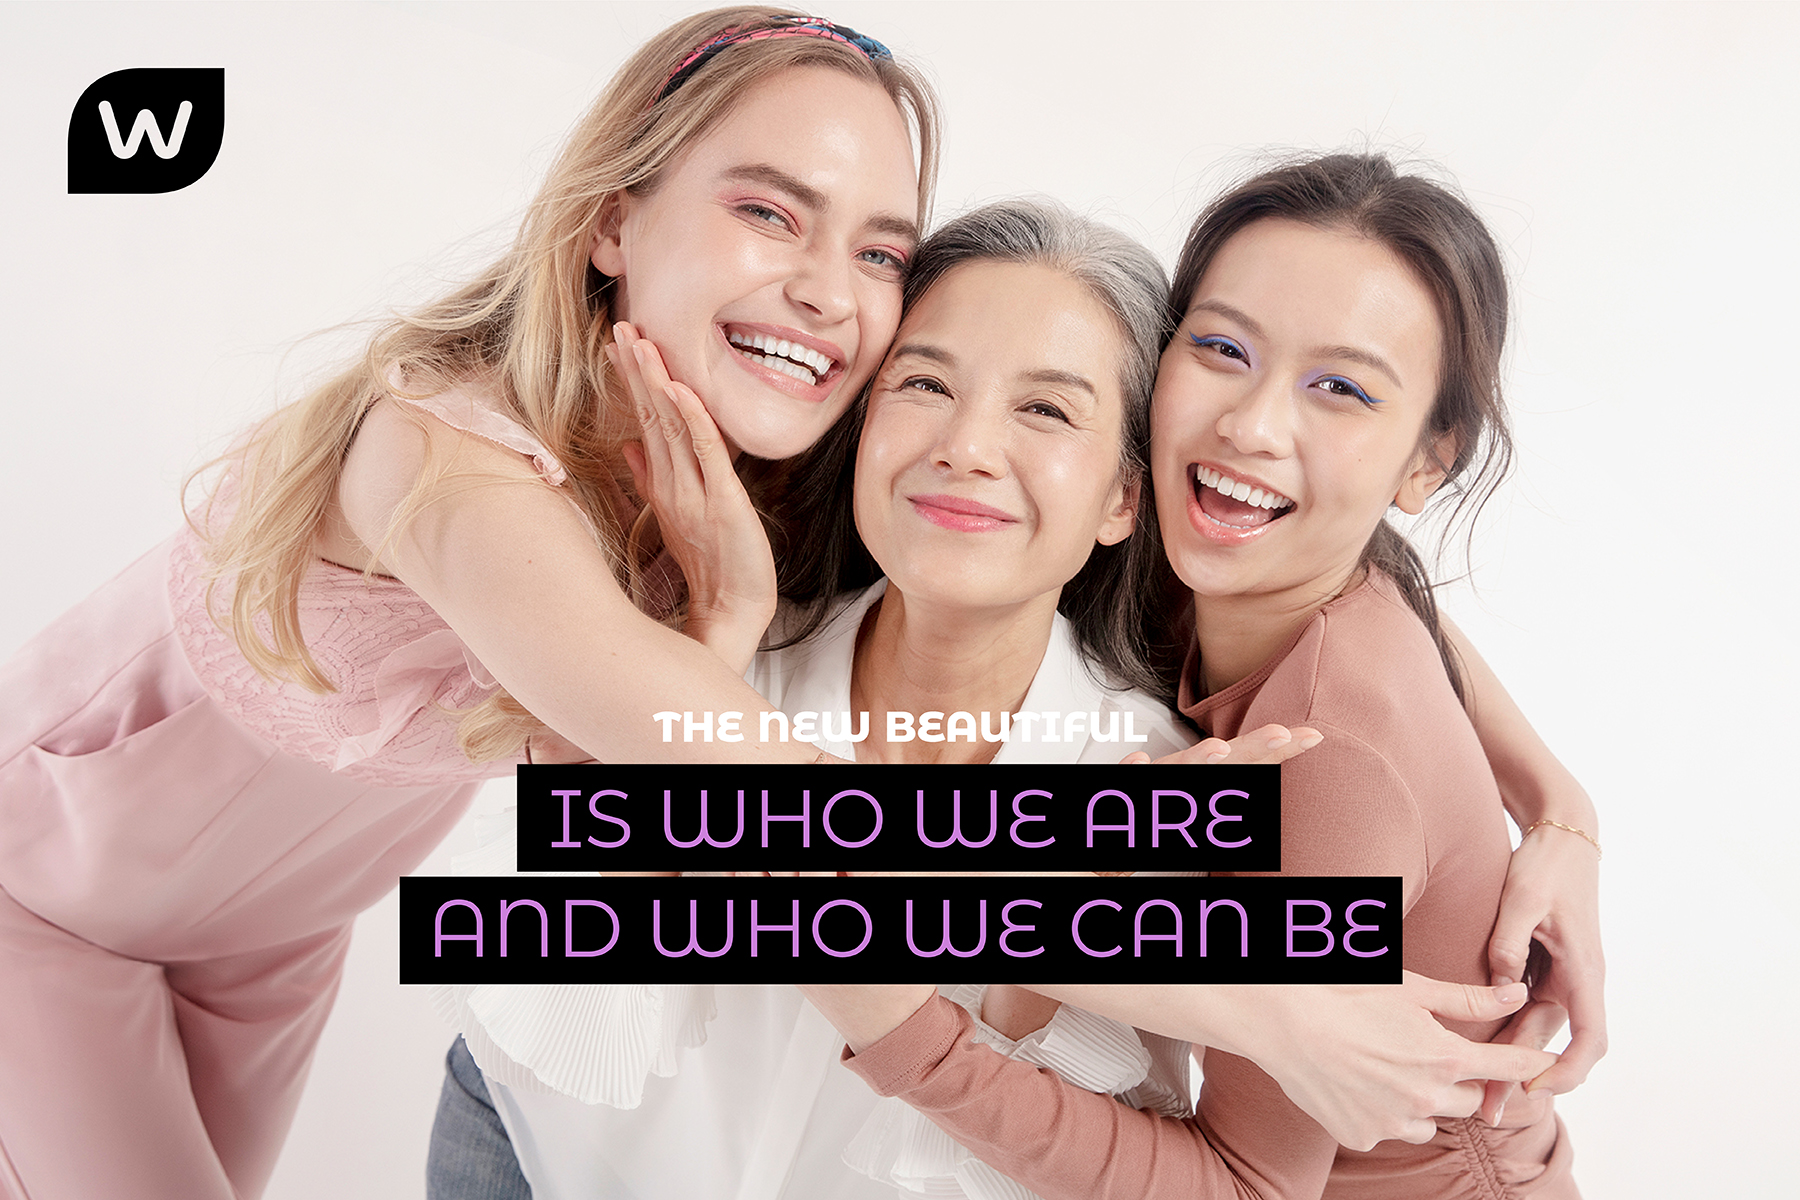 The New Beautiful - Who we are and who we can be